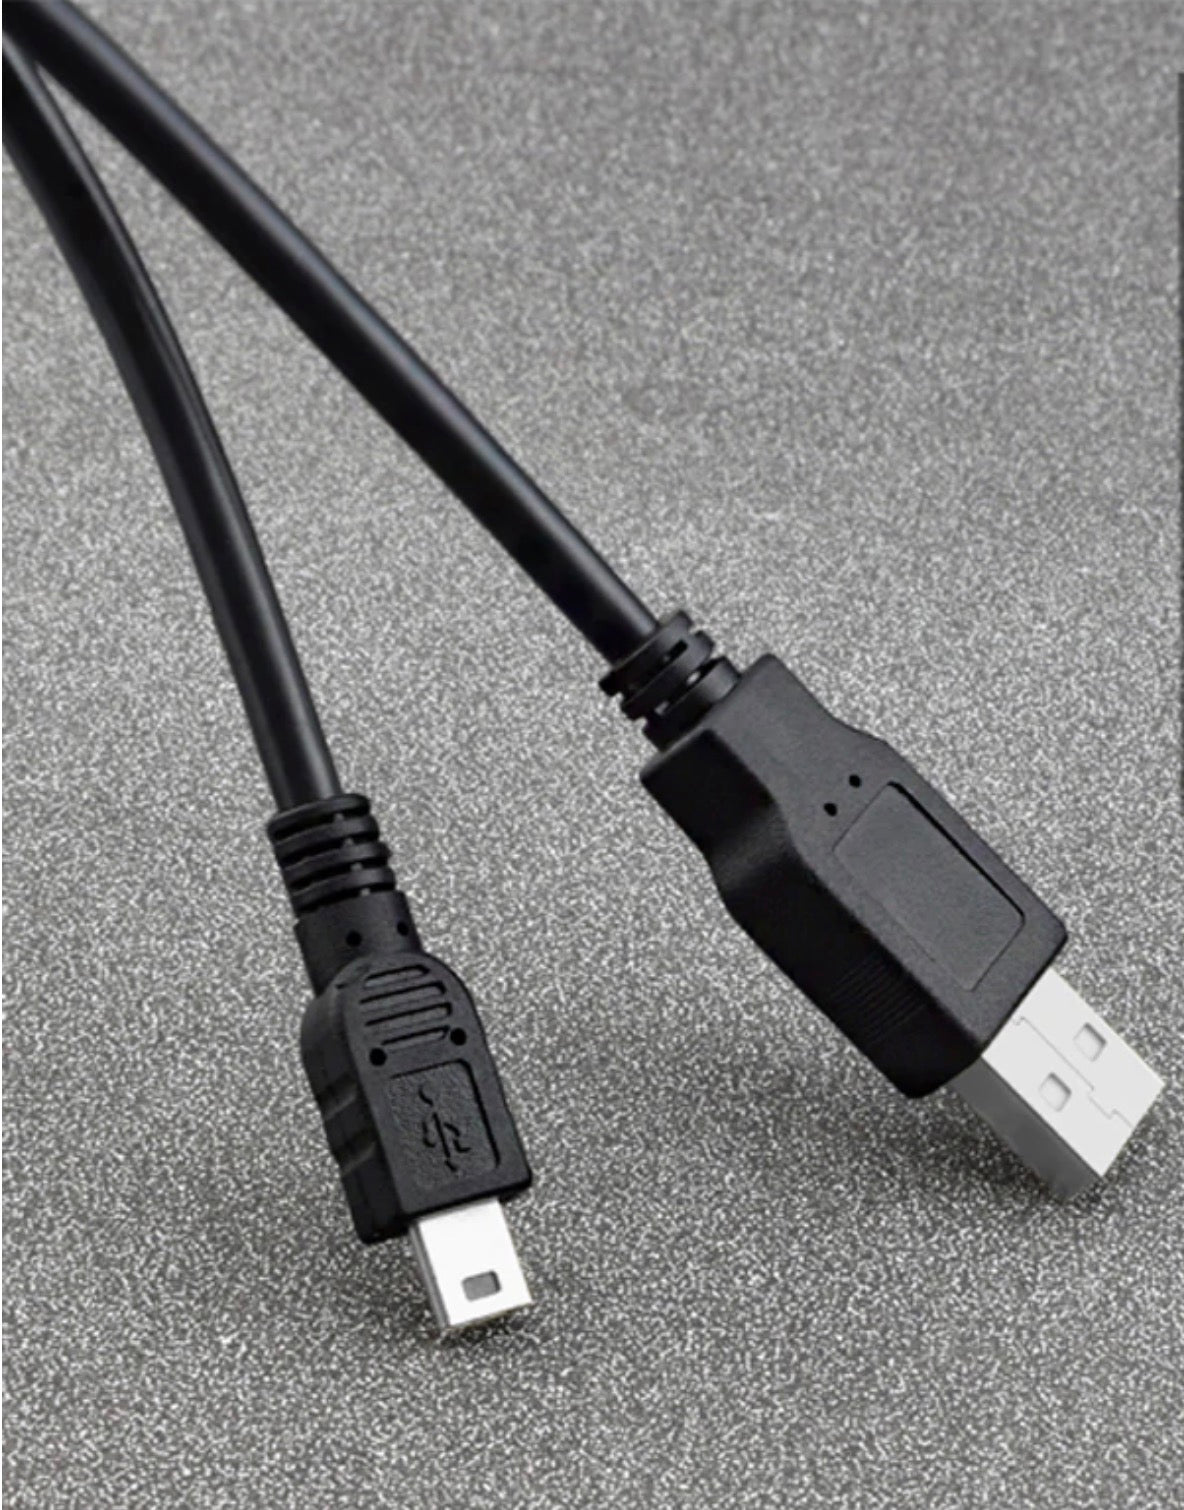 USB 2.0 Type A Male to Mini USB 5 Pin Male Data Charging Cable 1.8m